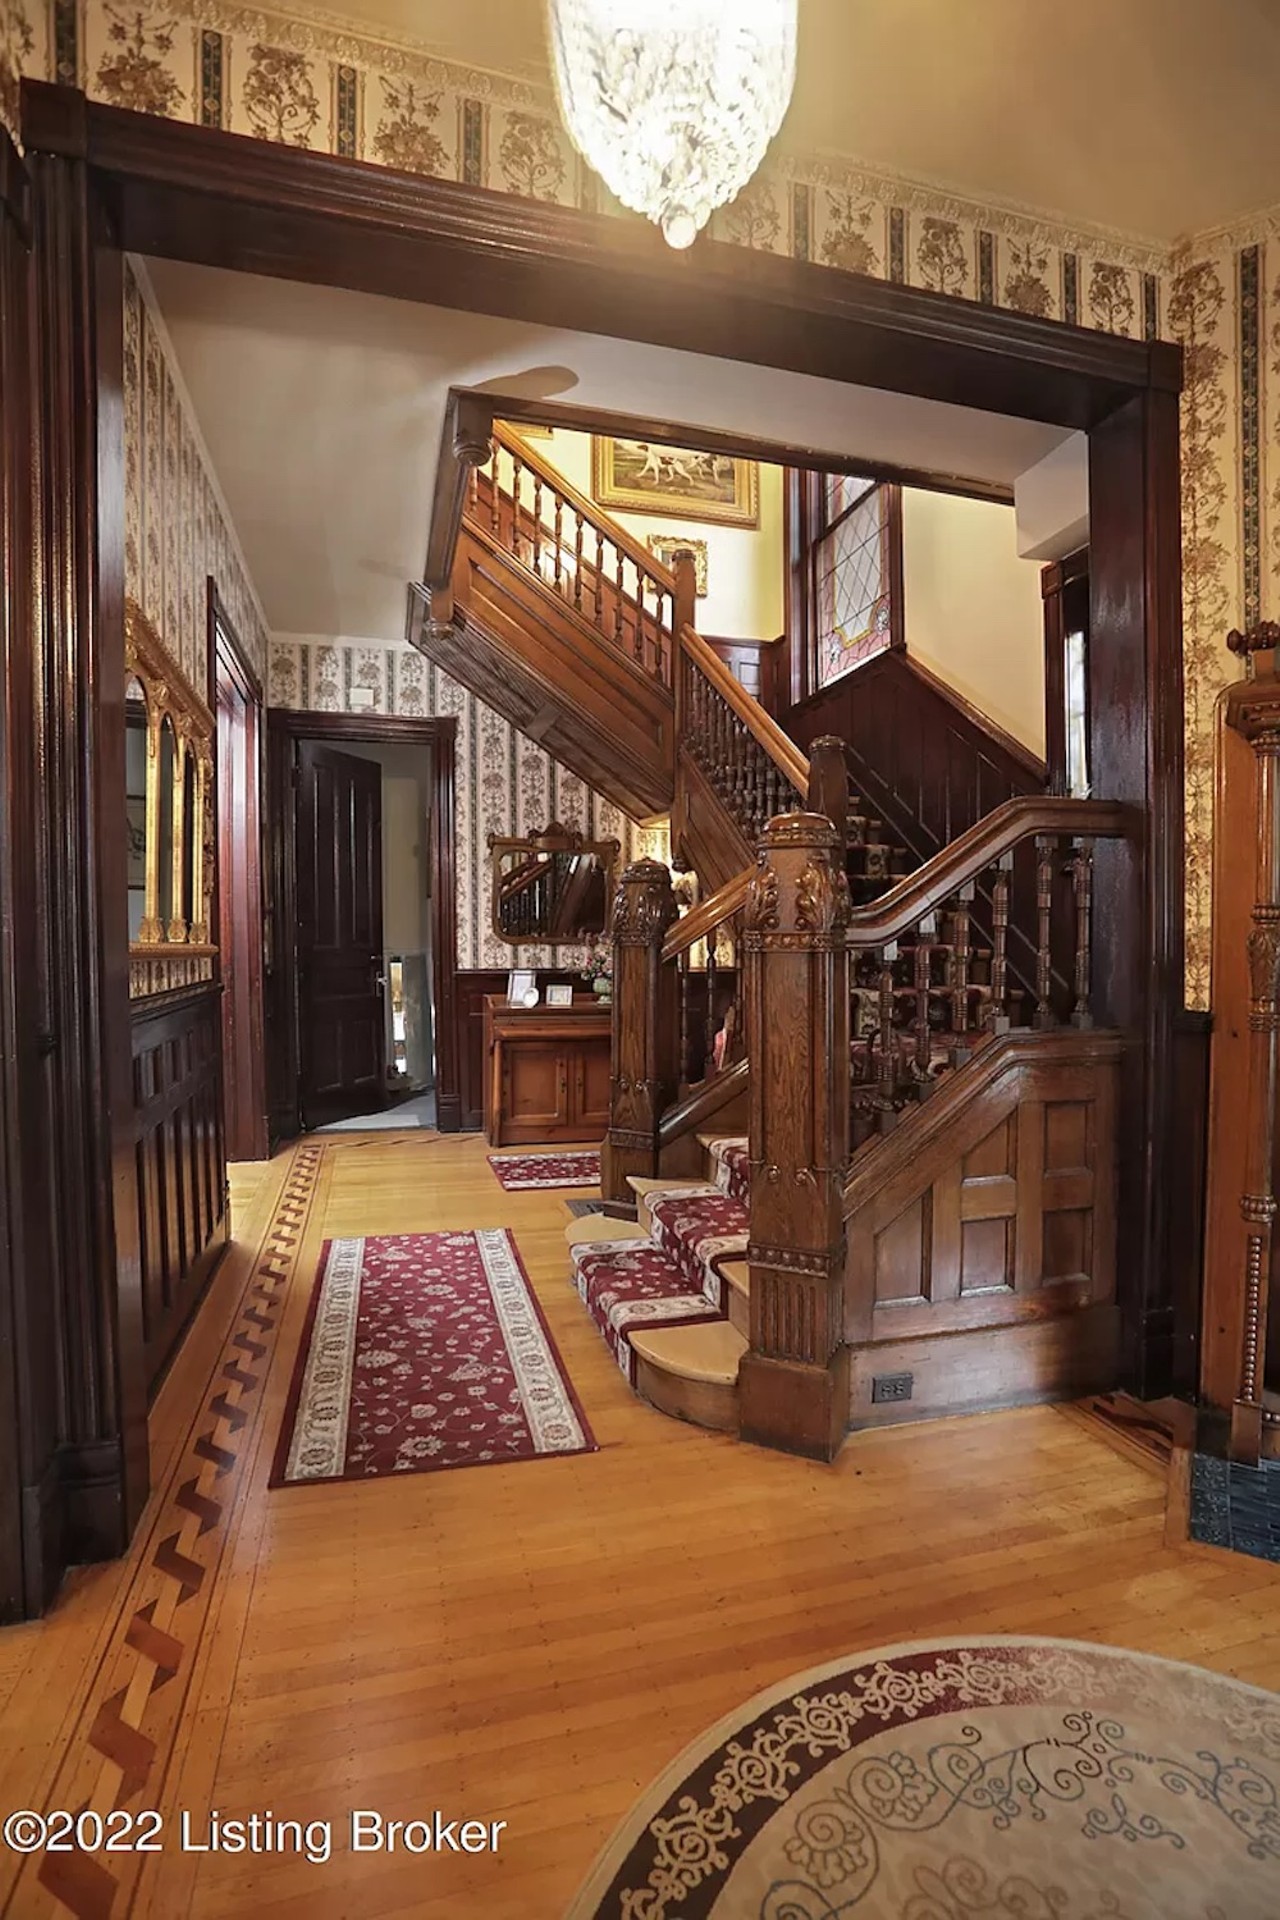 This Historic Old Louisville Home For Sale Has A Secret Backyard Oasis [PHOTOS]